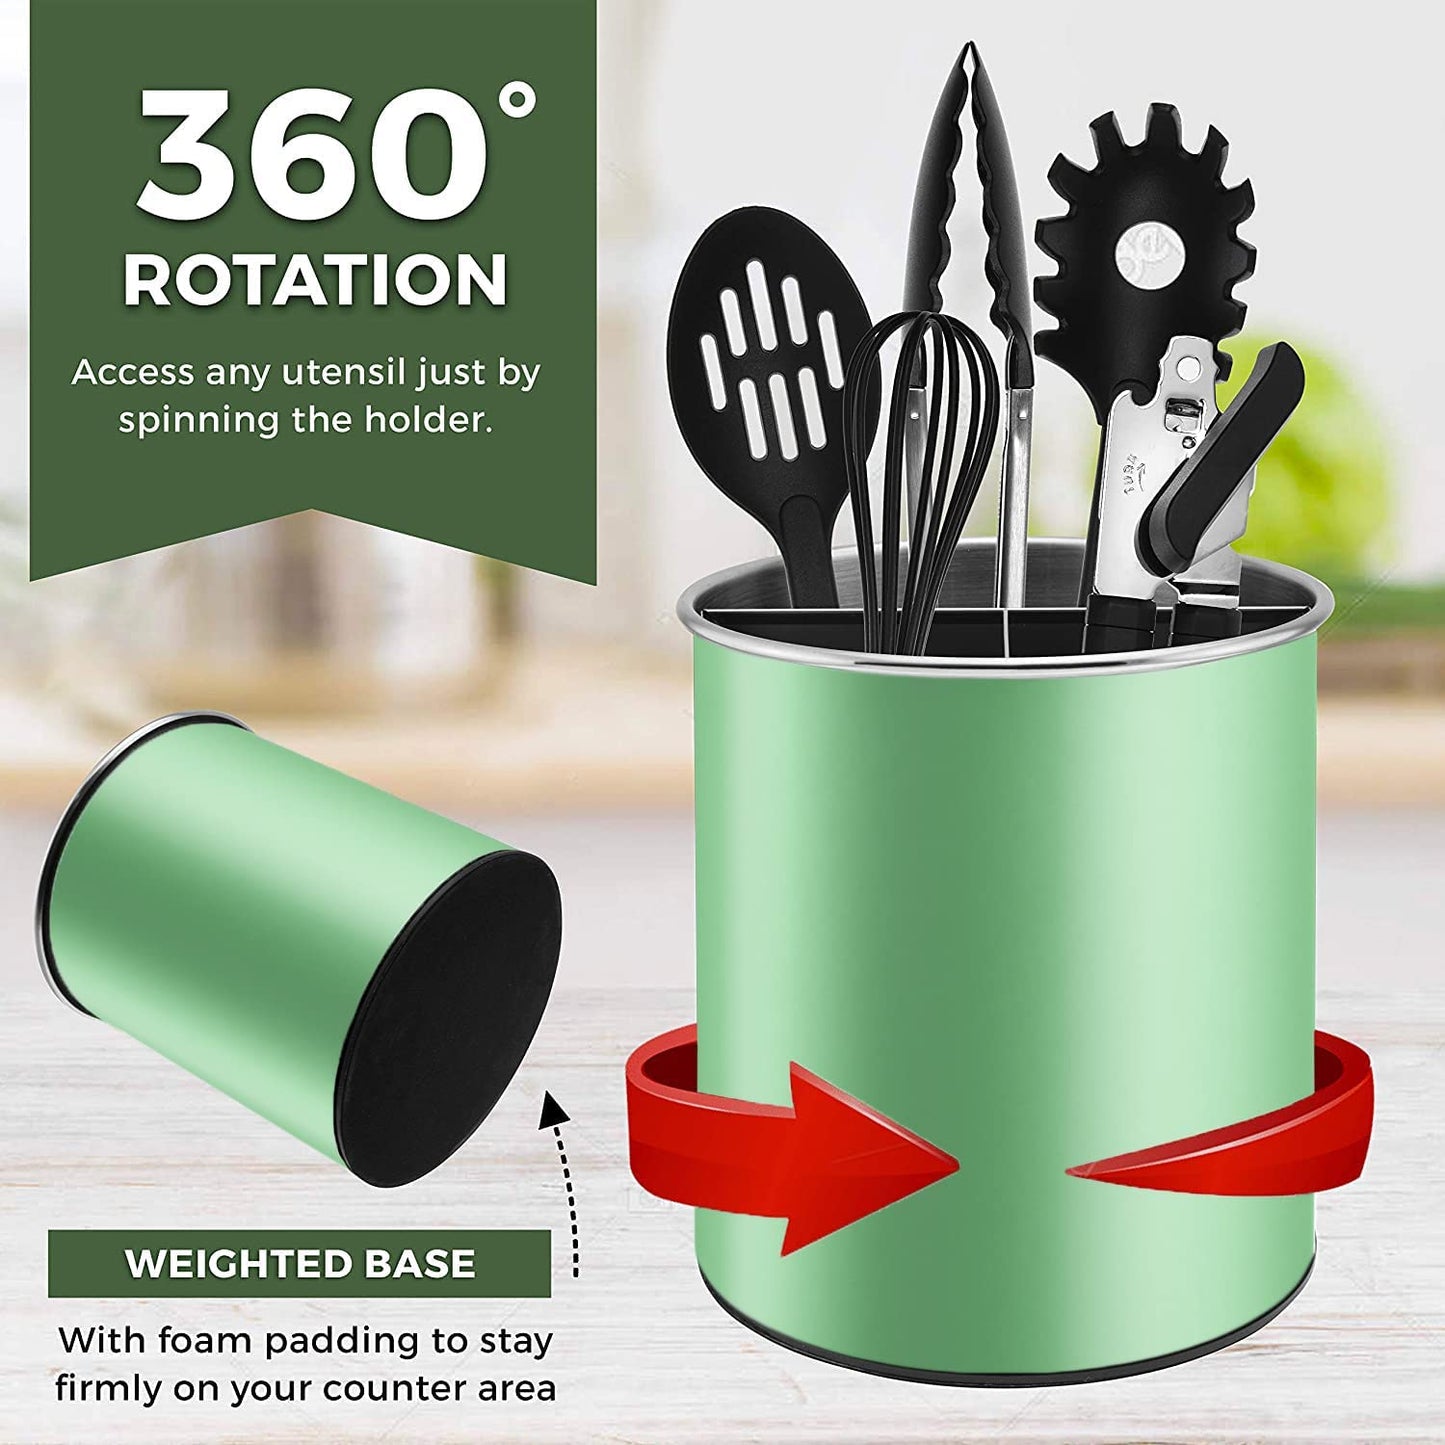 Bartnelli Extra Large Stainless Steel Kitchen Utensil Holder - 360° Rotating Utensil Caddy - Weighted Base for Stability - Countertop Organizer Crock With Removable Divider (TEA GREEN)